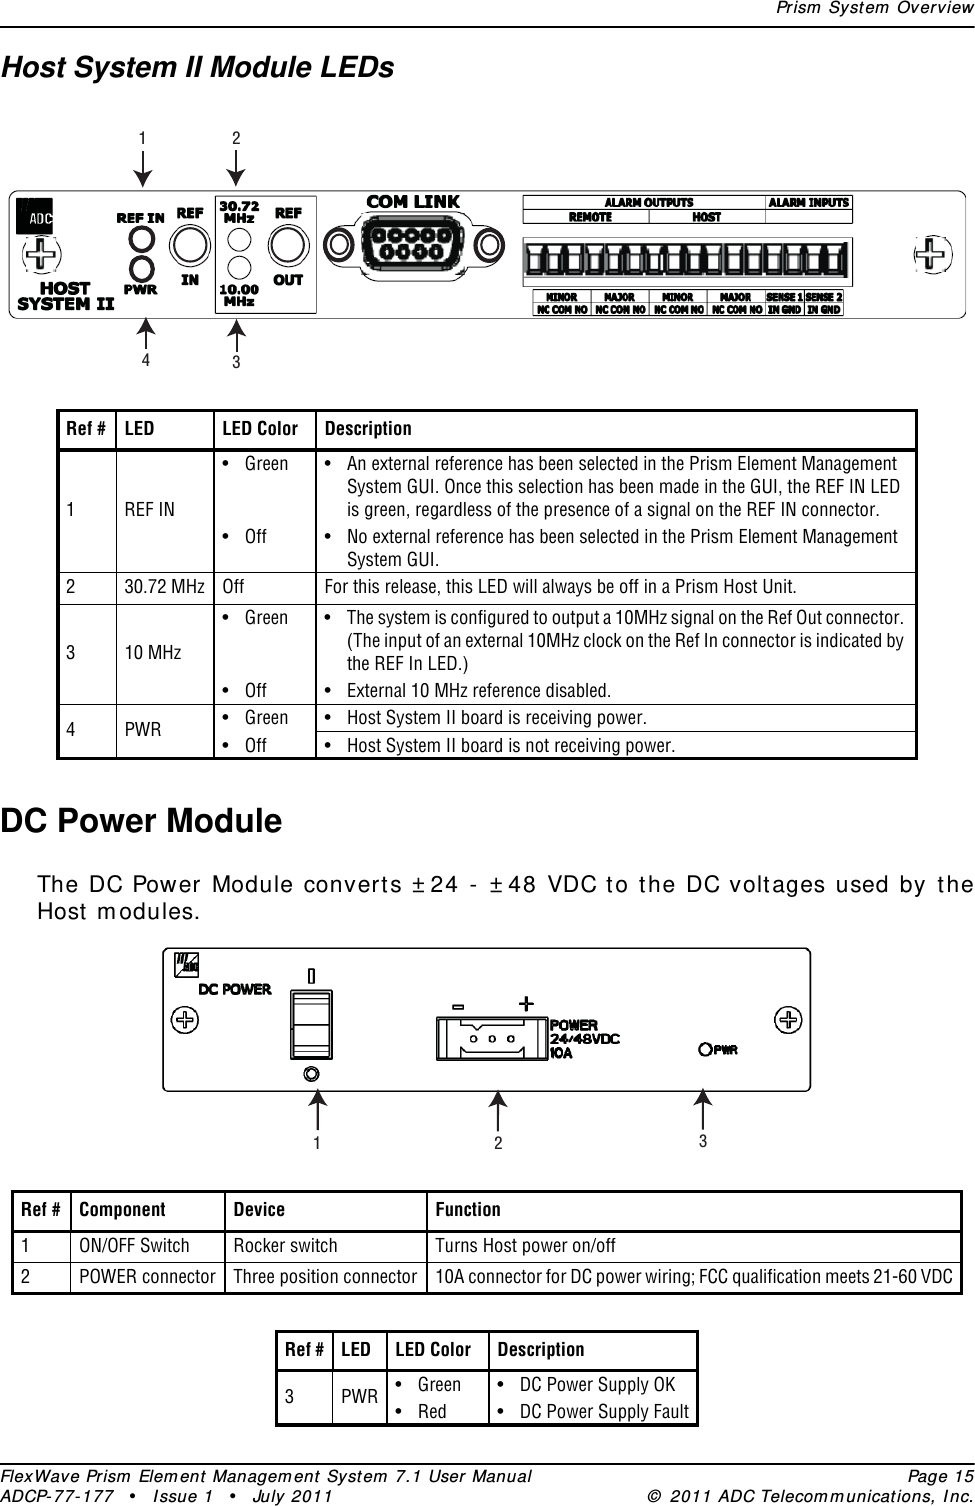 Prism  Syst em  OverviewFlexWave Prism  Elem ent Managem ent  Syst em  7.1 User Manual Page 15ADCP- 77- 1 77 • I ssue 1 • July 2011 ©  2011 ADC Telecom m unications, I nc.Host System II Module LEDsDC Power ModuleThe DC Power Module convert s ± 24 -  ± 48 VDC t o t he DC volt ages used by t he Host  m odules.Ref # LED LED Color Description1REF IN• Green • An external reference has been selected in the Prism Element Management System GUI. Once this selection has been made in the GUI, the REF IN LED is green, regardless of the presence of a signal on the REF IN connector.• Off • No external reference has been selected in the Prism Element Management System GUI.230.72 MHz Off For this release, this LED will always be off in a Prism Host Unit.310 MHz• Green • The system is configured to output a 10MHz signal on the Ref Out connector. (The input of an external 10MHz clock on the Ref In connector is indicated by the REF In LED.)• Off • External 10 MHz reference disabled.4PWR • Green • Host System II board is receiving power.• Off • Host System II board is not receiving power.Ref # Component Device Function1ON/OFF Switch Rocker switch Turns Host power on/off2POWER connector Three position connector 10A connector for DC power wiring; FCC qualification meets 21-60 VDCRef # LED LED Color Description3PWR • Green • DC Power Supply OK• Red • DC Power Supply Fault1 234123